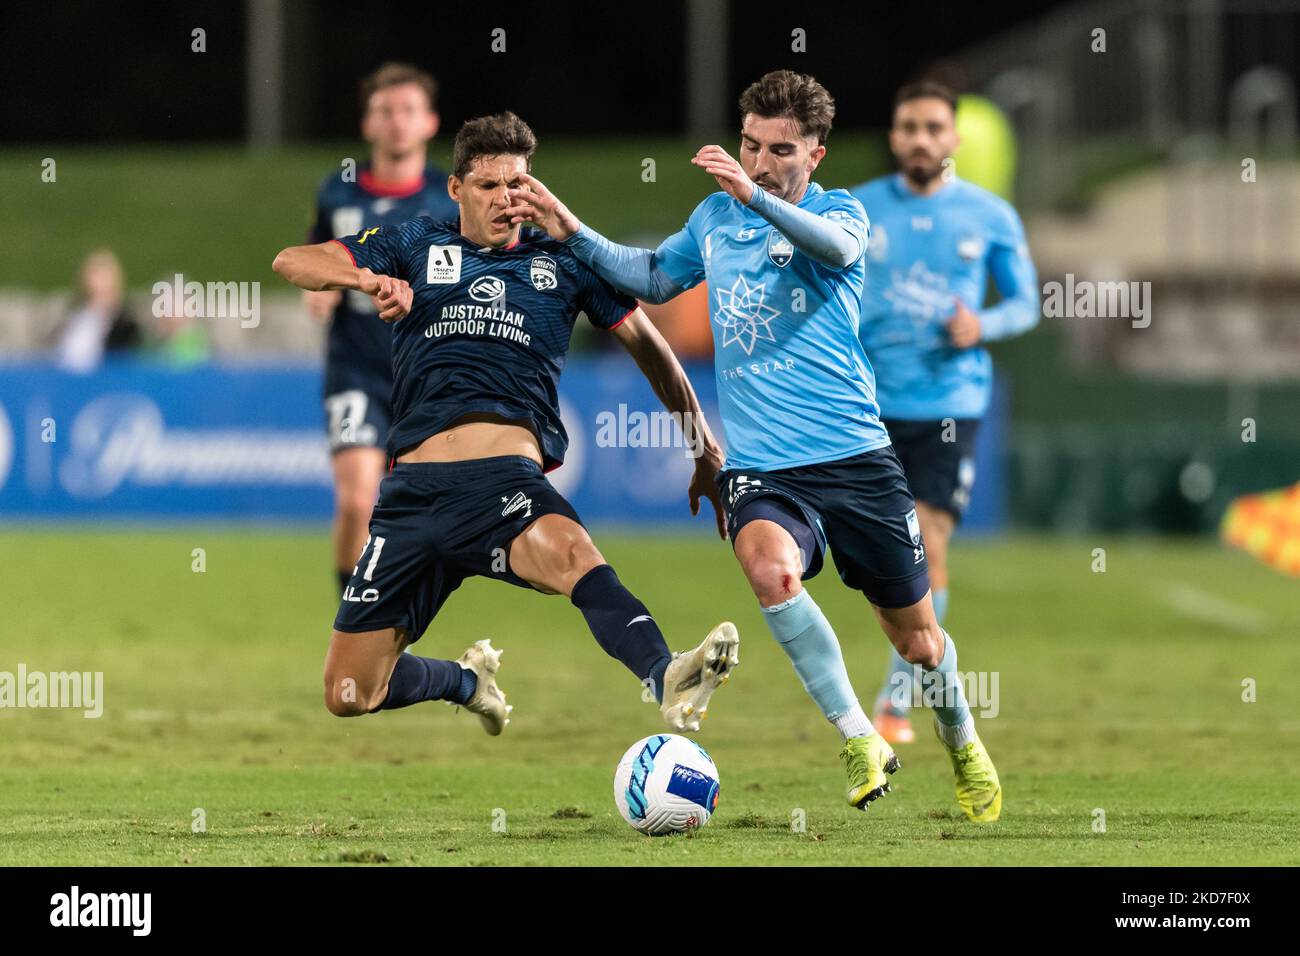 Callum Talbot of Sydney FC and Javier Lopez of Adelaide United F.C. compete for the ball during the A-League match between Sydney FC and Adelaide United FC at Netstrata Jubilee Stadium, on April 12, 2022, in Sydney, Australia. Stock Photo